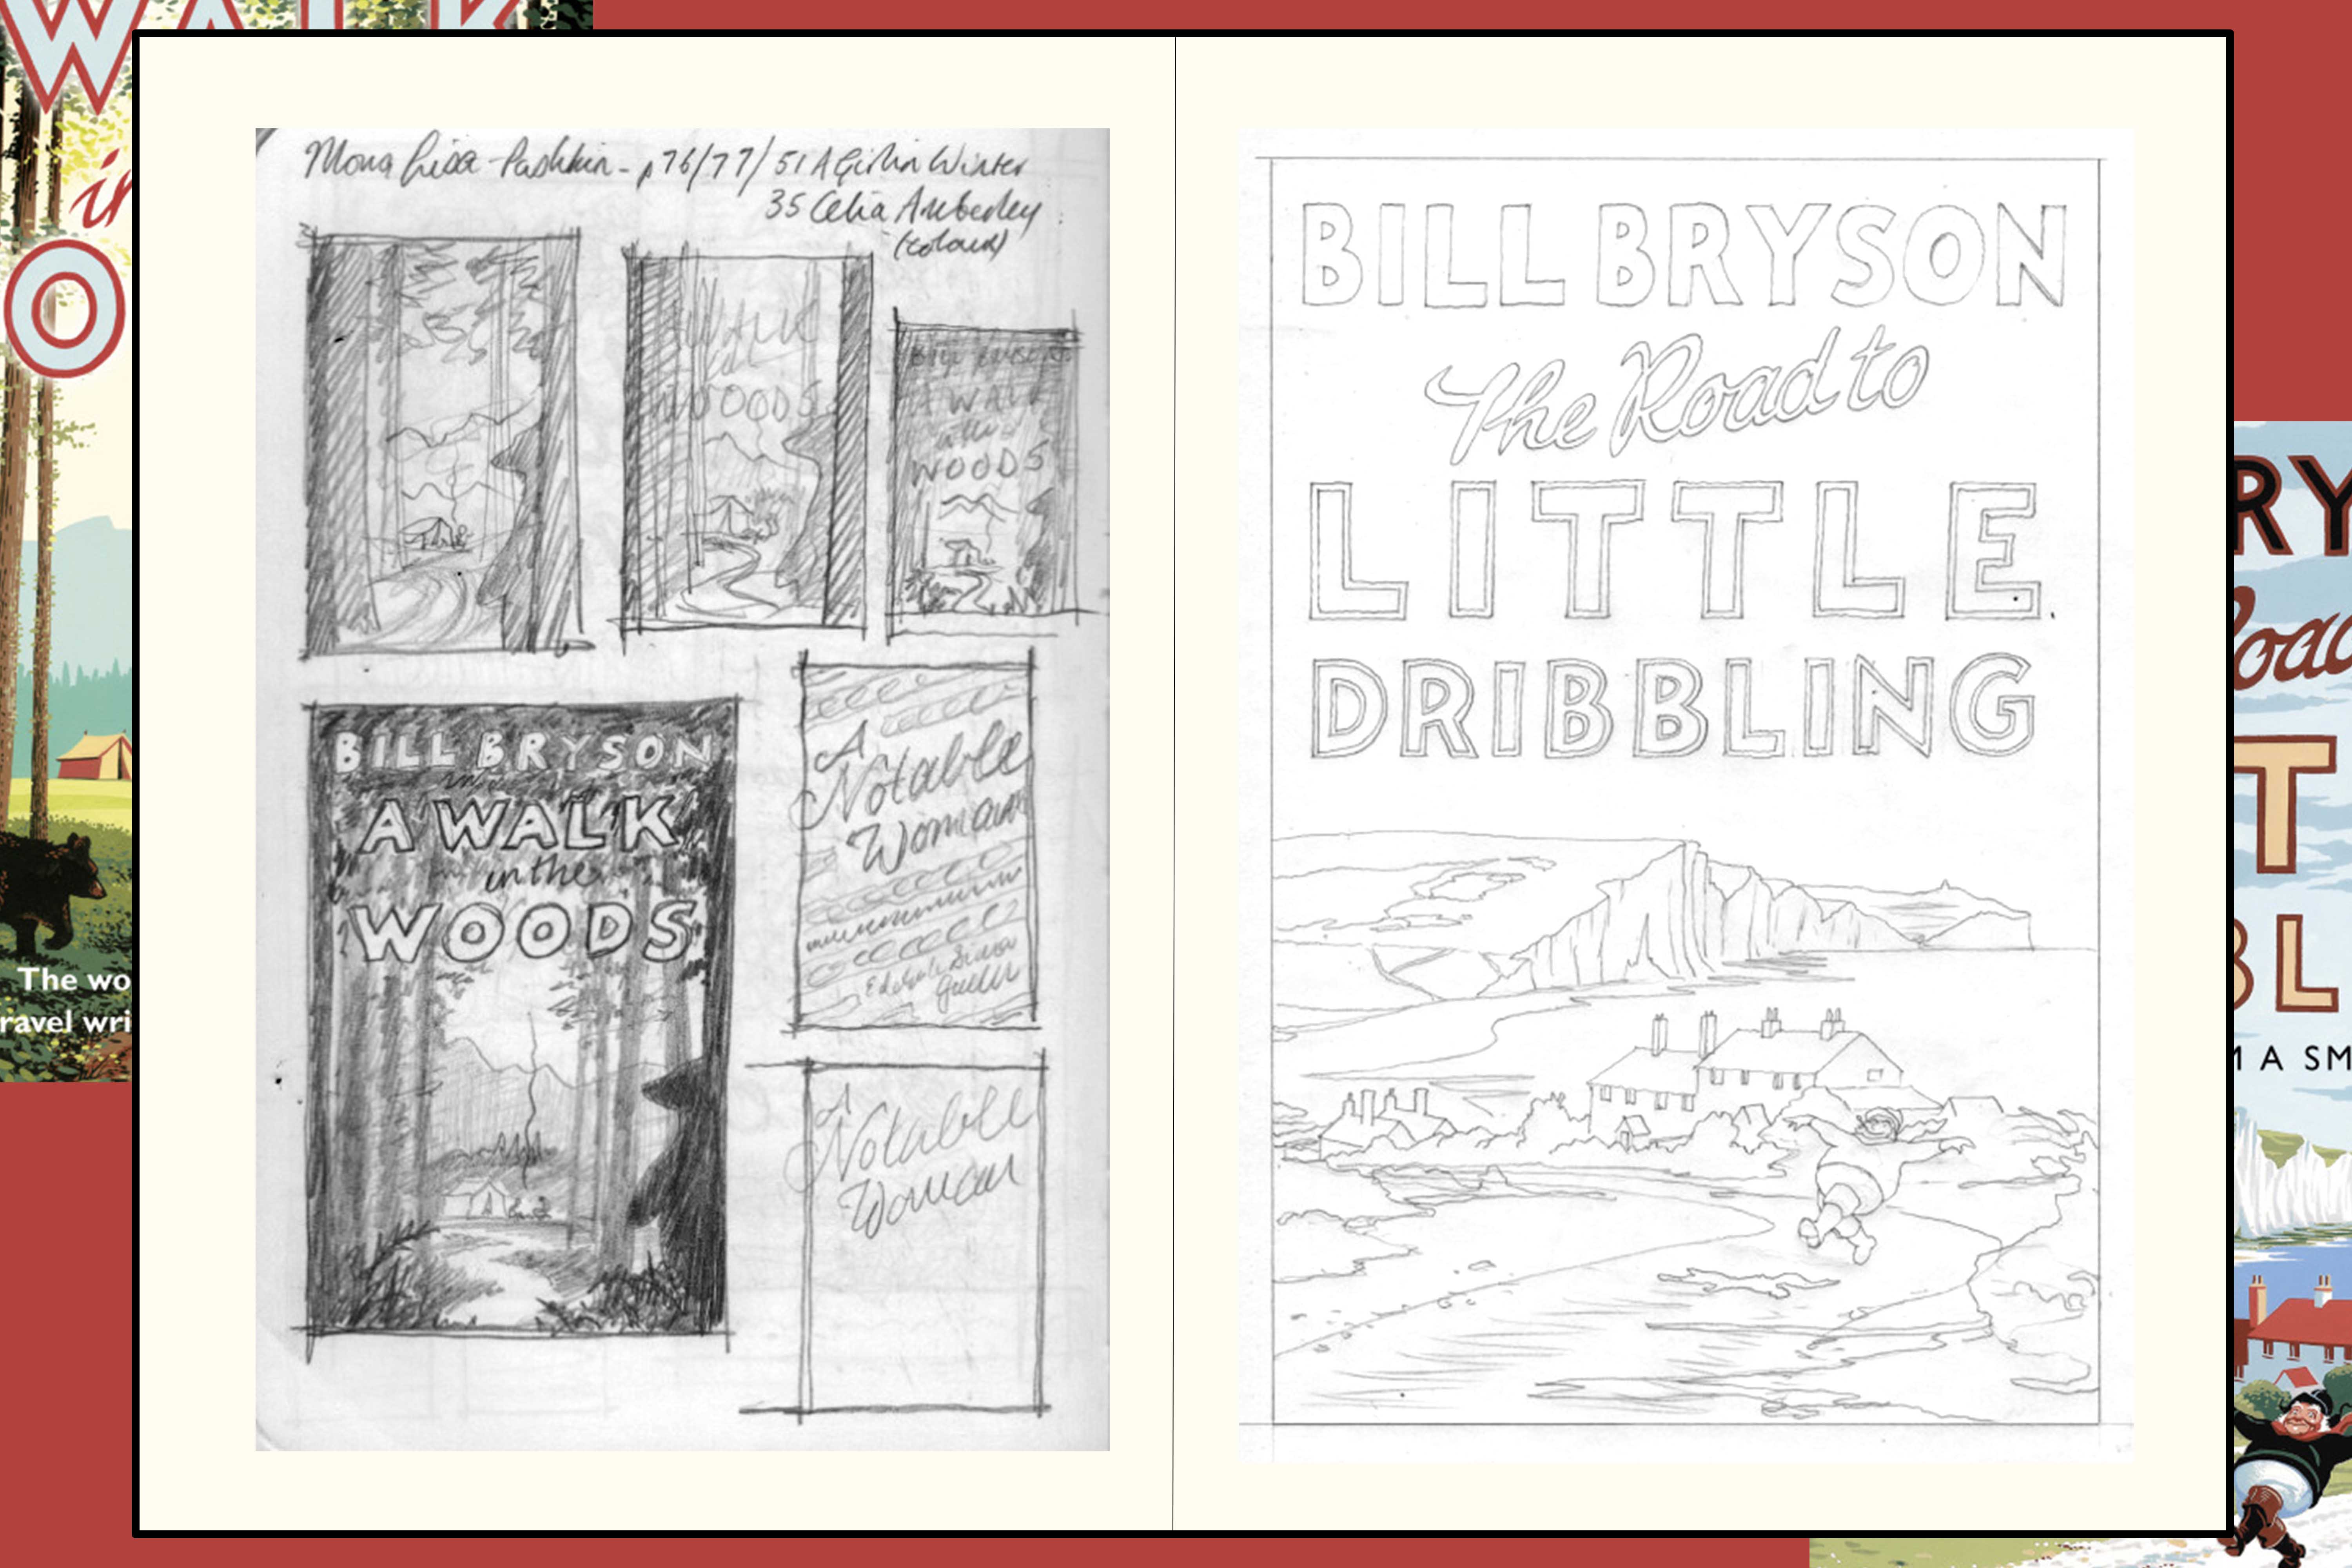 Sketches of early Bill Bryson covers